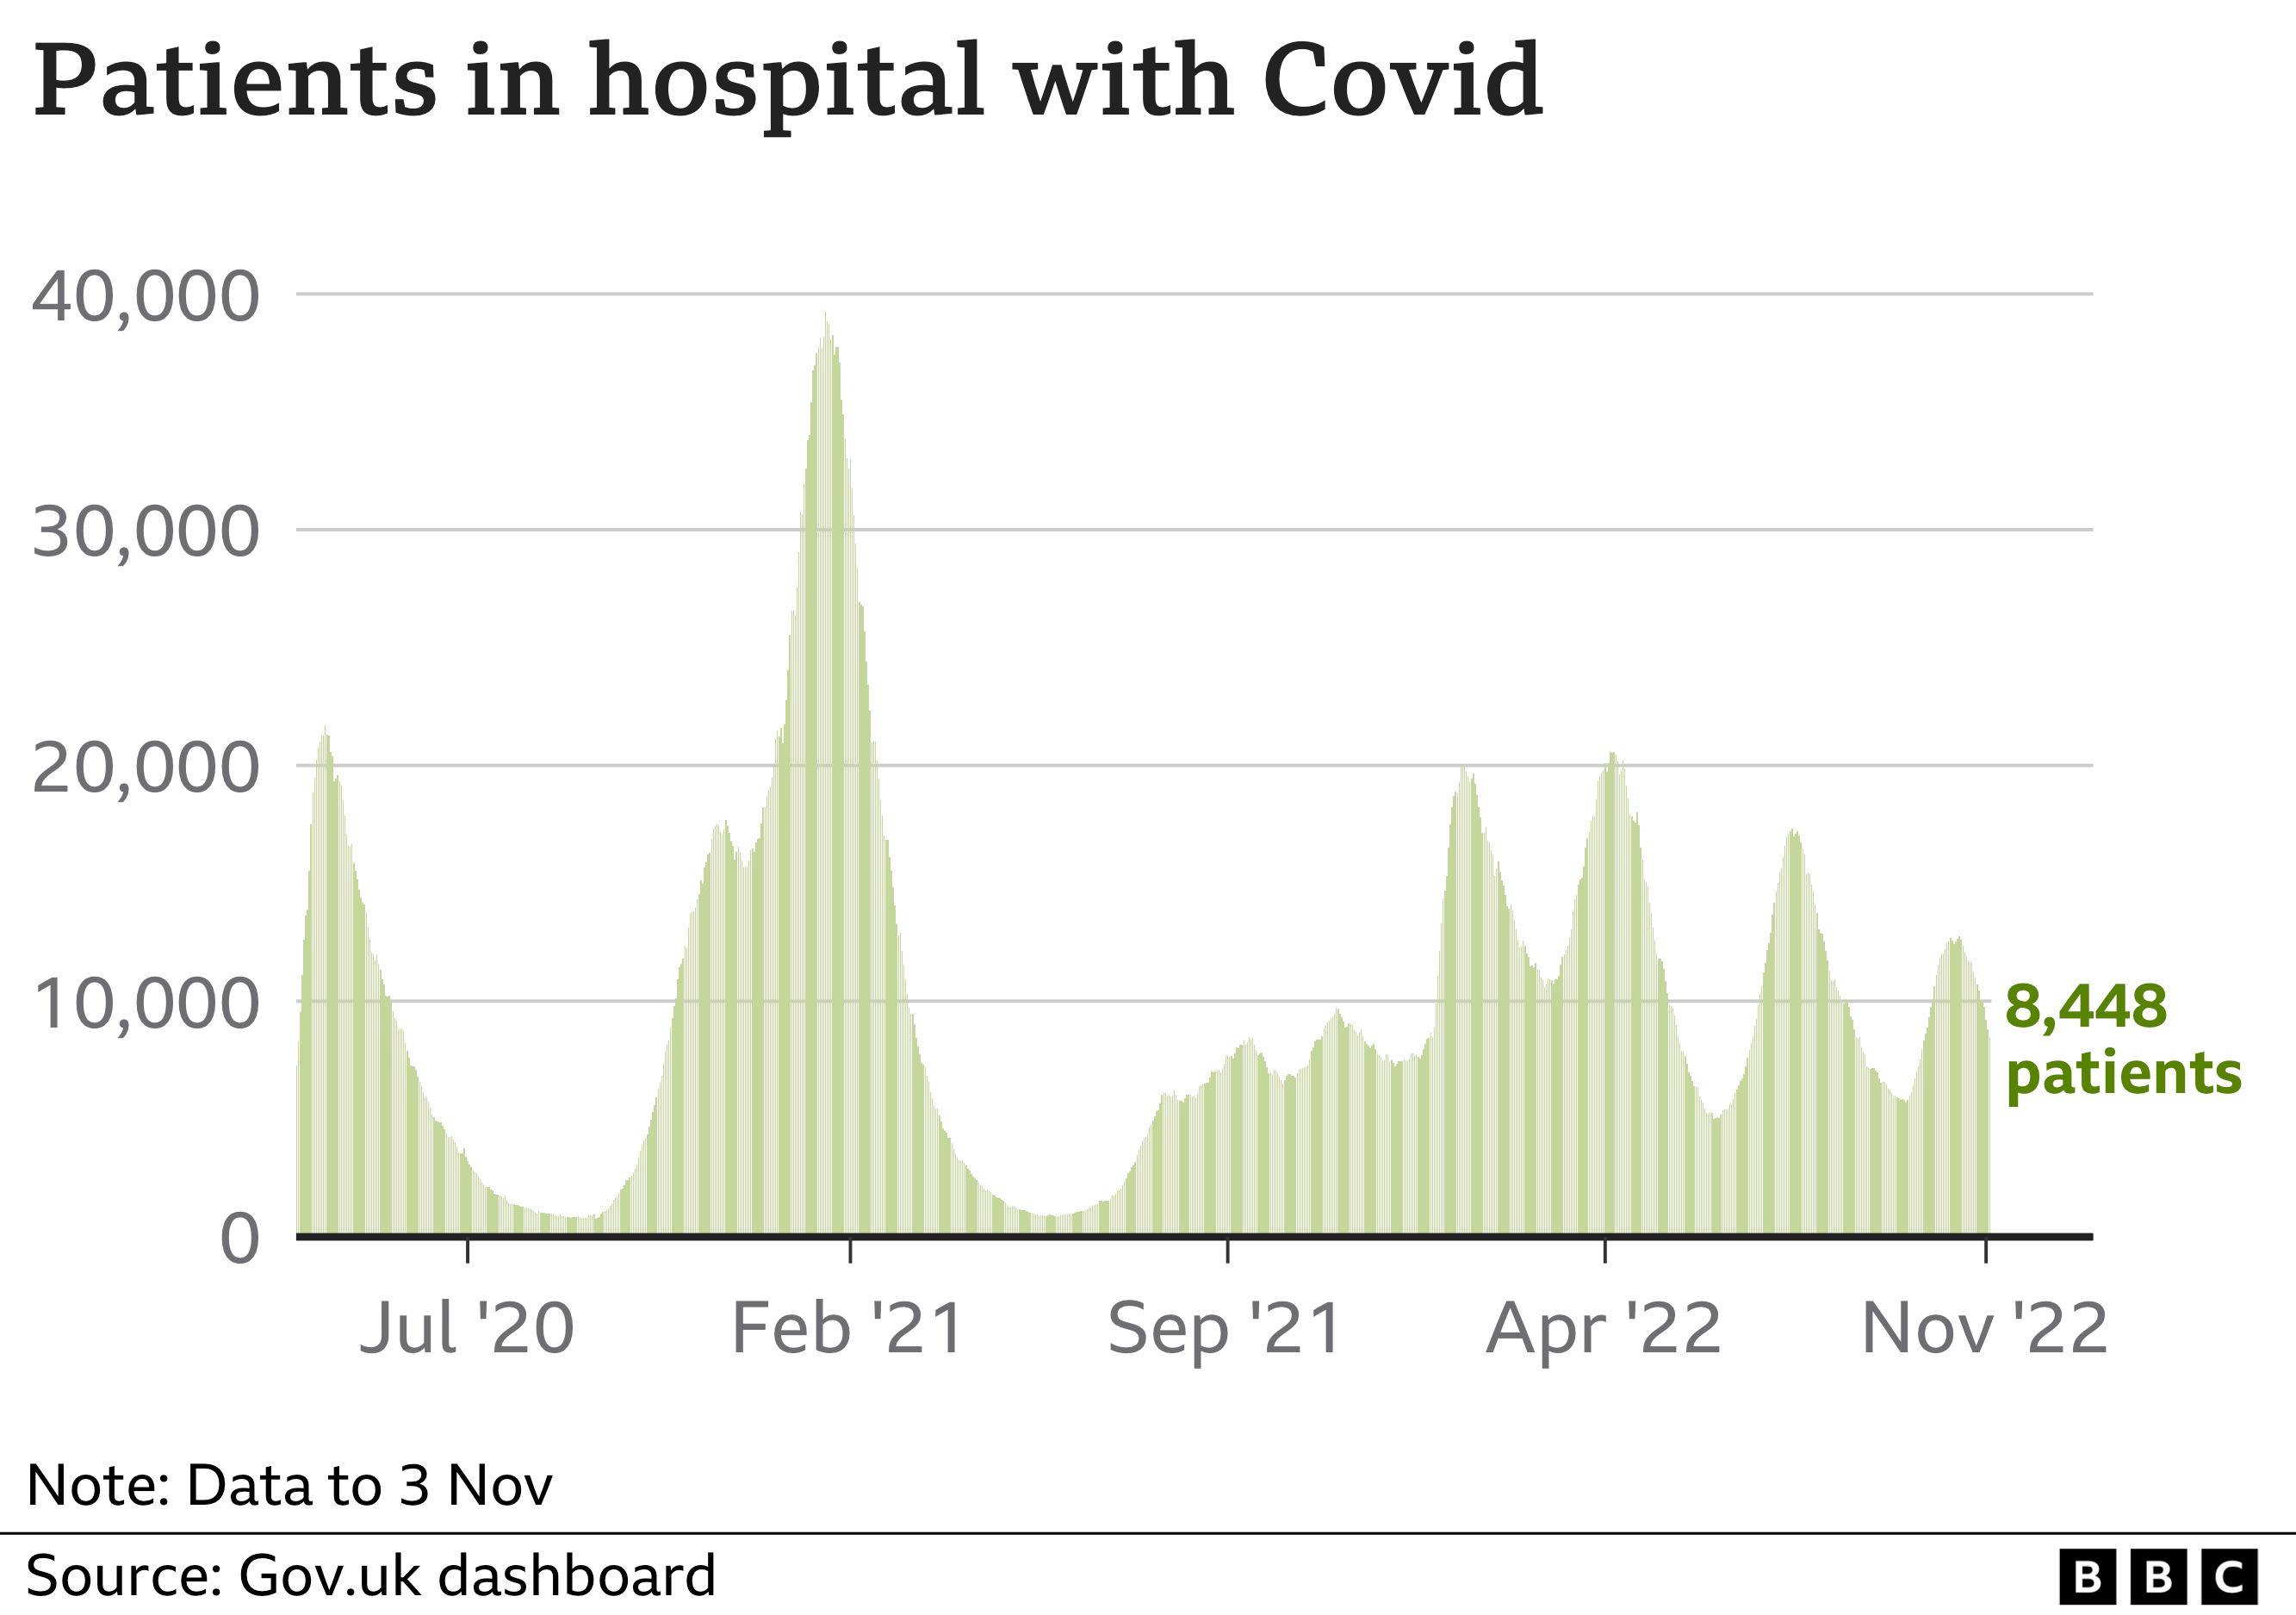 Chart showing patients in hospital with coronavirus. Shows a significant peak in January 2021. On 3 Nov there were 8,448 people in hospital with coronavirus in England, Scotland and Wales.